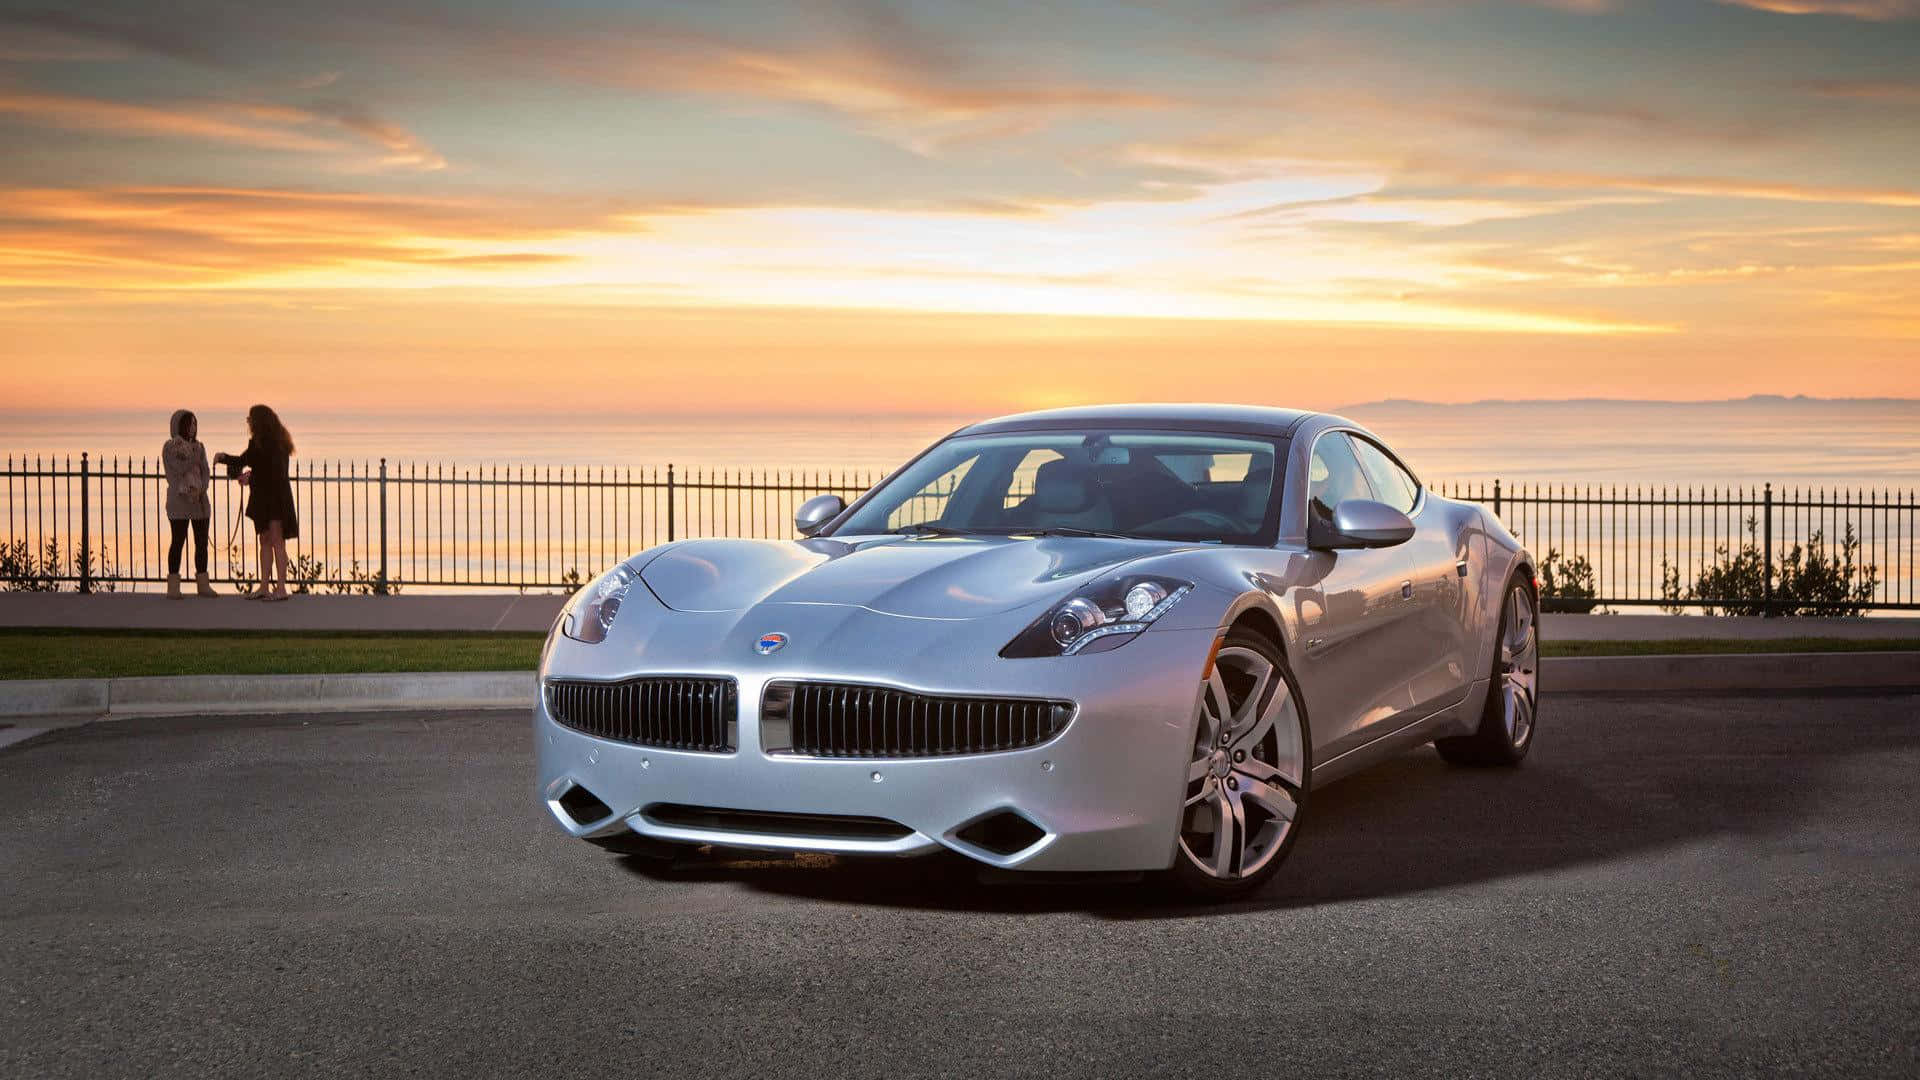 Fisker Electric Vehicle on a Scenic Road Wallpaper